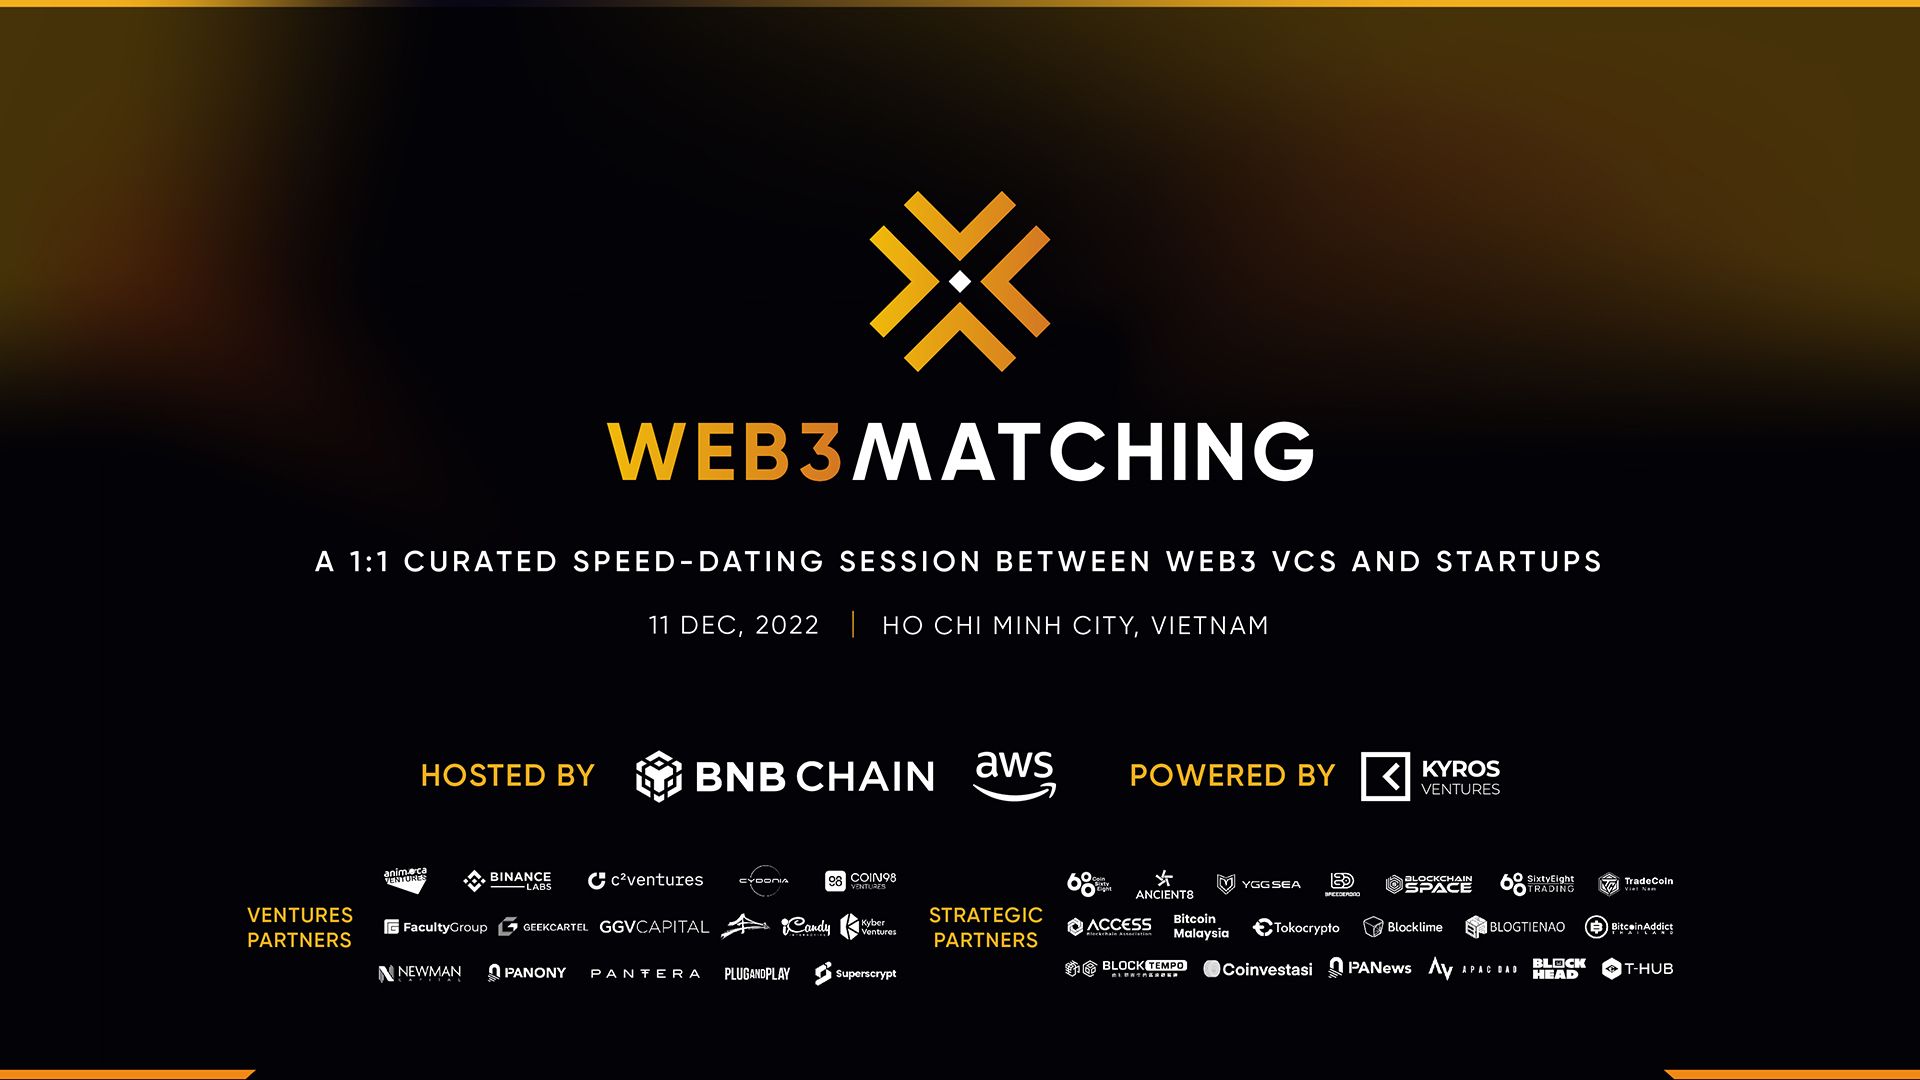 WEB3 MATCHING - Exclusive Web3 Event by AWS, BNB Chain and Kyros Ventures